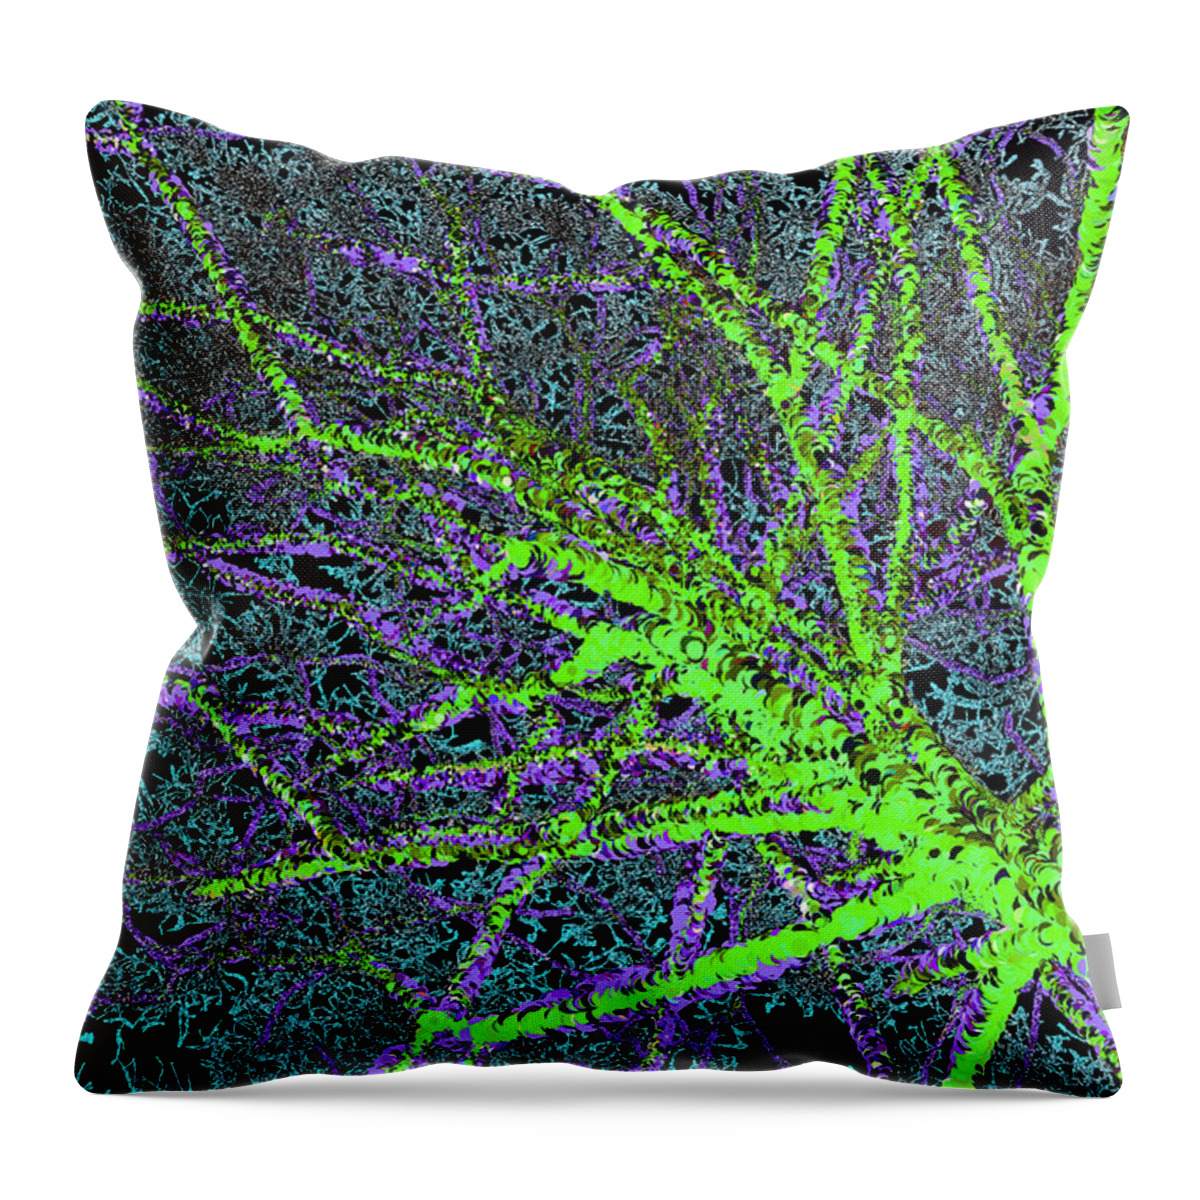 Abstract Throw Pillow featuring the painting Tree-mendous by Bruce Nutting